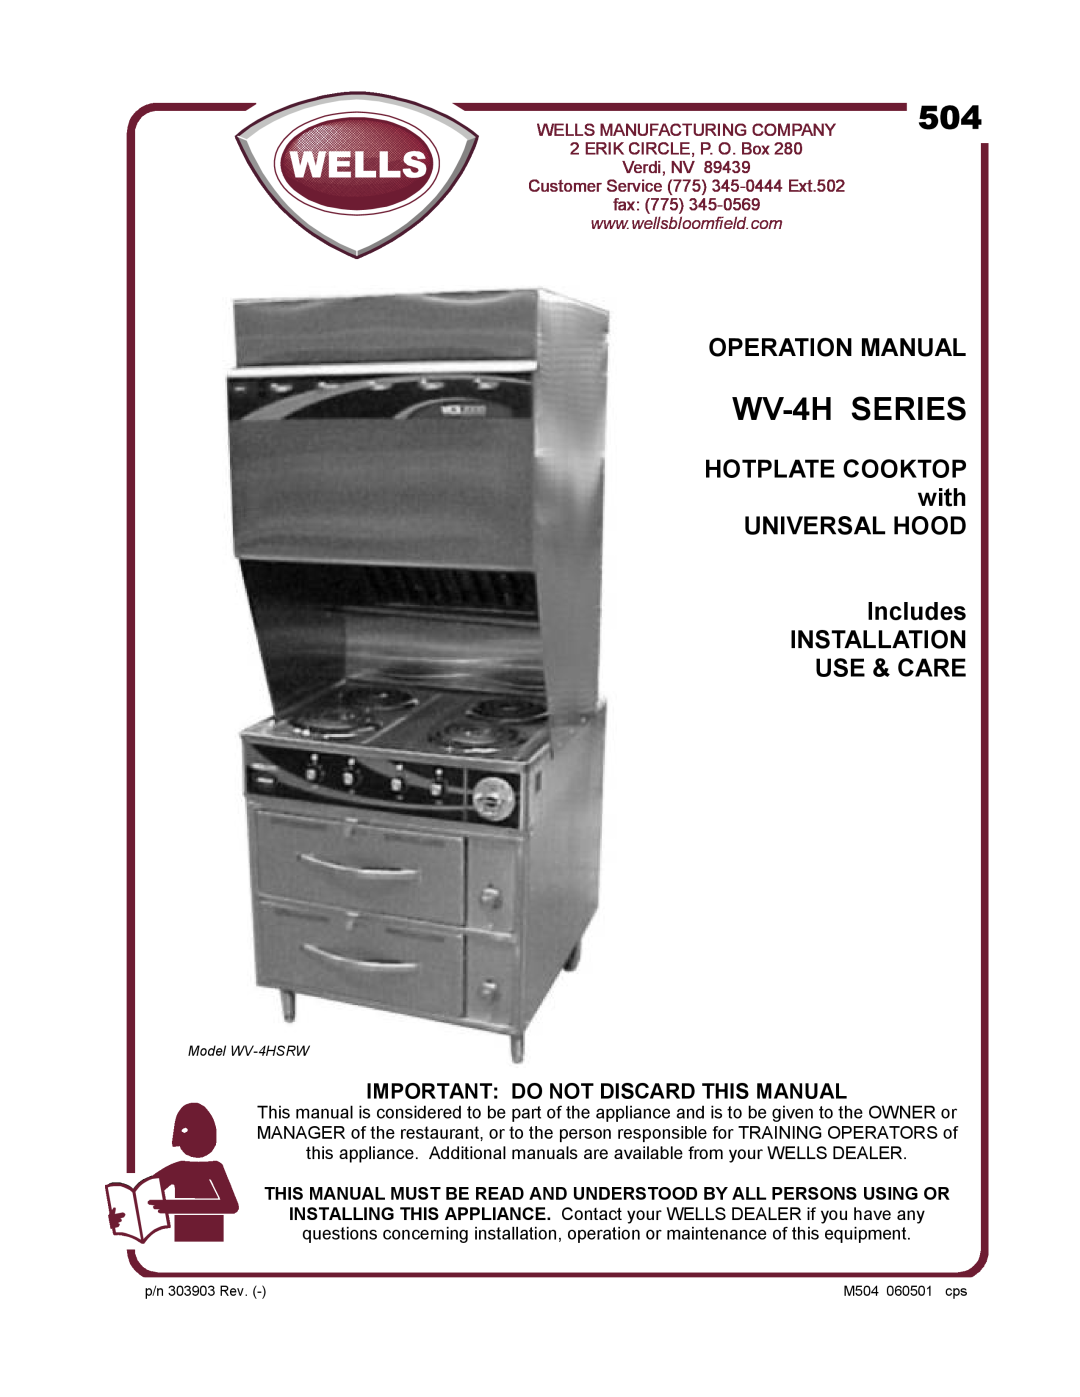 Wells WV-4HSRW operation manual UNIVERSAL HOOD Includes INSTALLATION USE & CARE, Important Do Not Discard This Manual, fax 